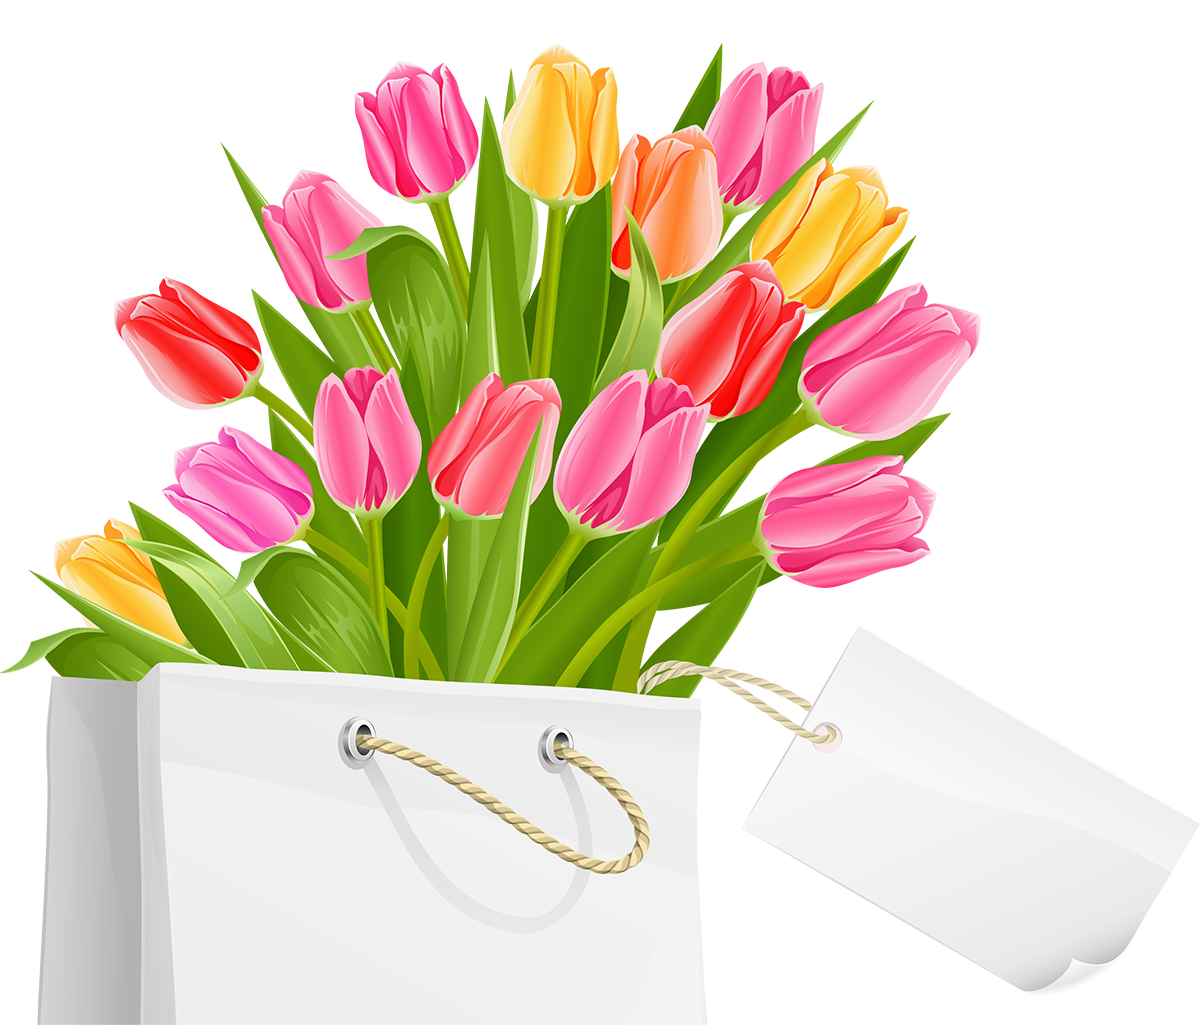 Spring Bag with Tulips PNG Clipart Picture | Gallery ...